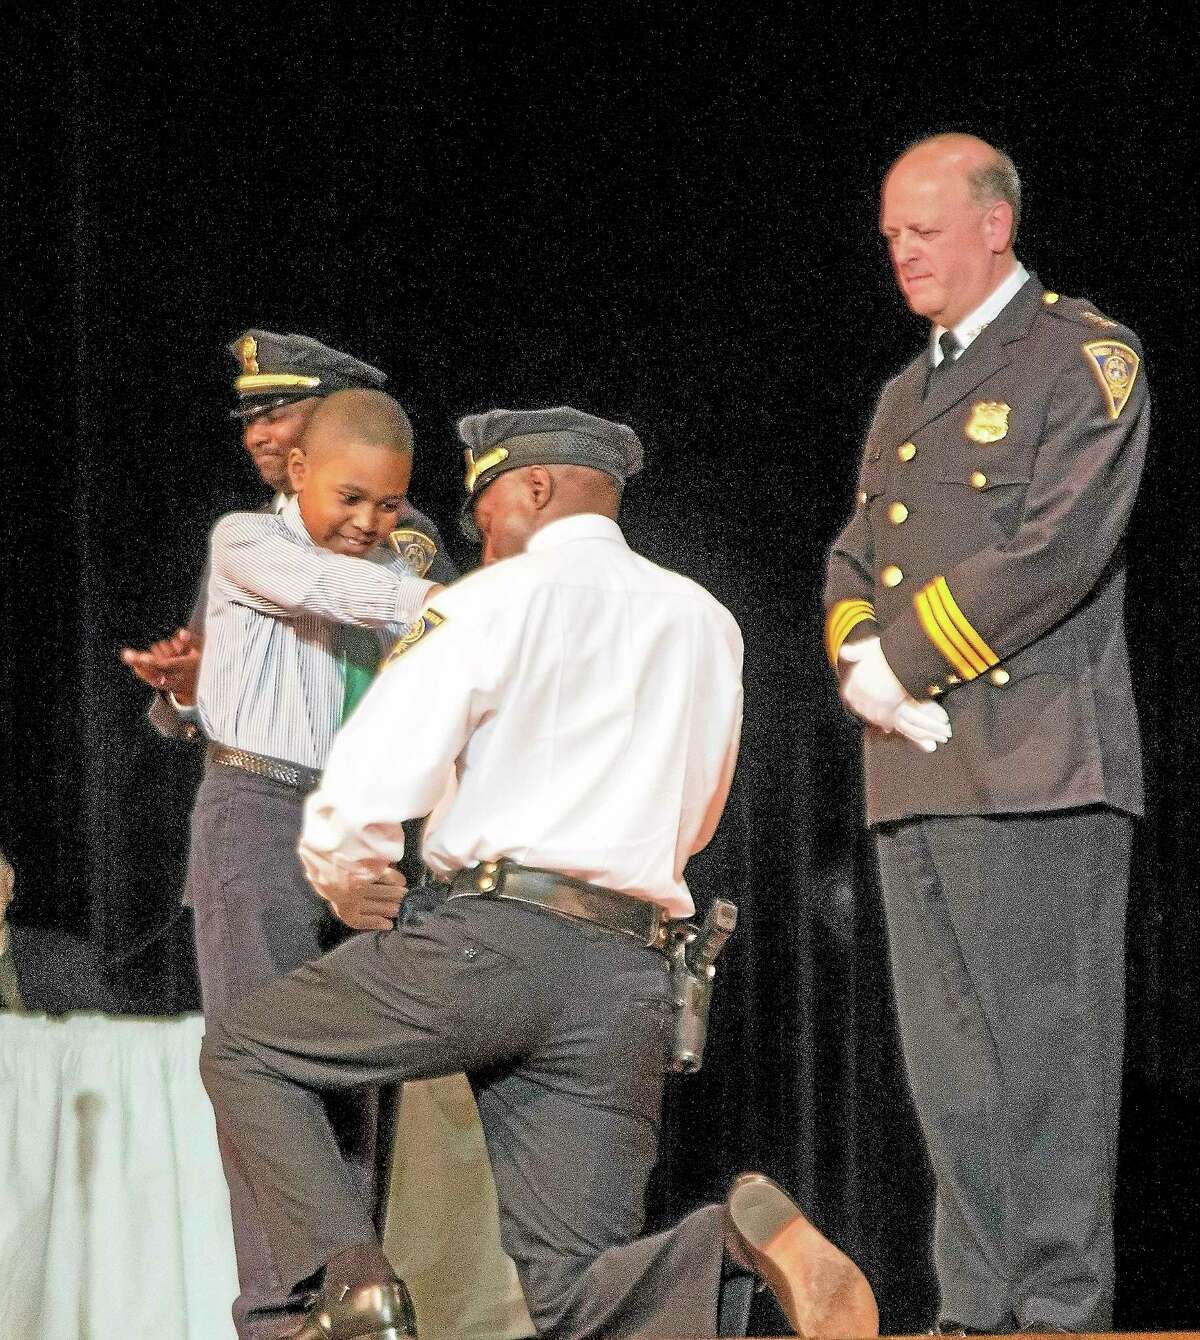 Sanderson Campbell pins a badge on his father, Lt. Anthony Campbell, during Friday night’s New Haven police promotion ceremony.